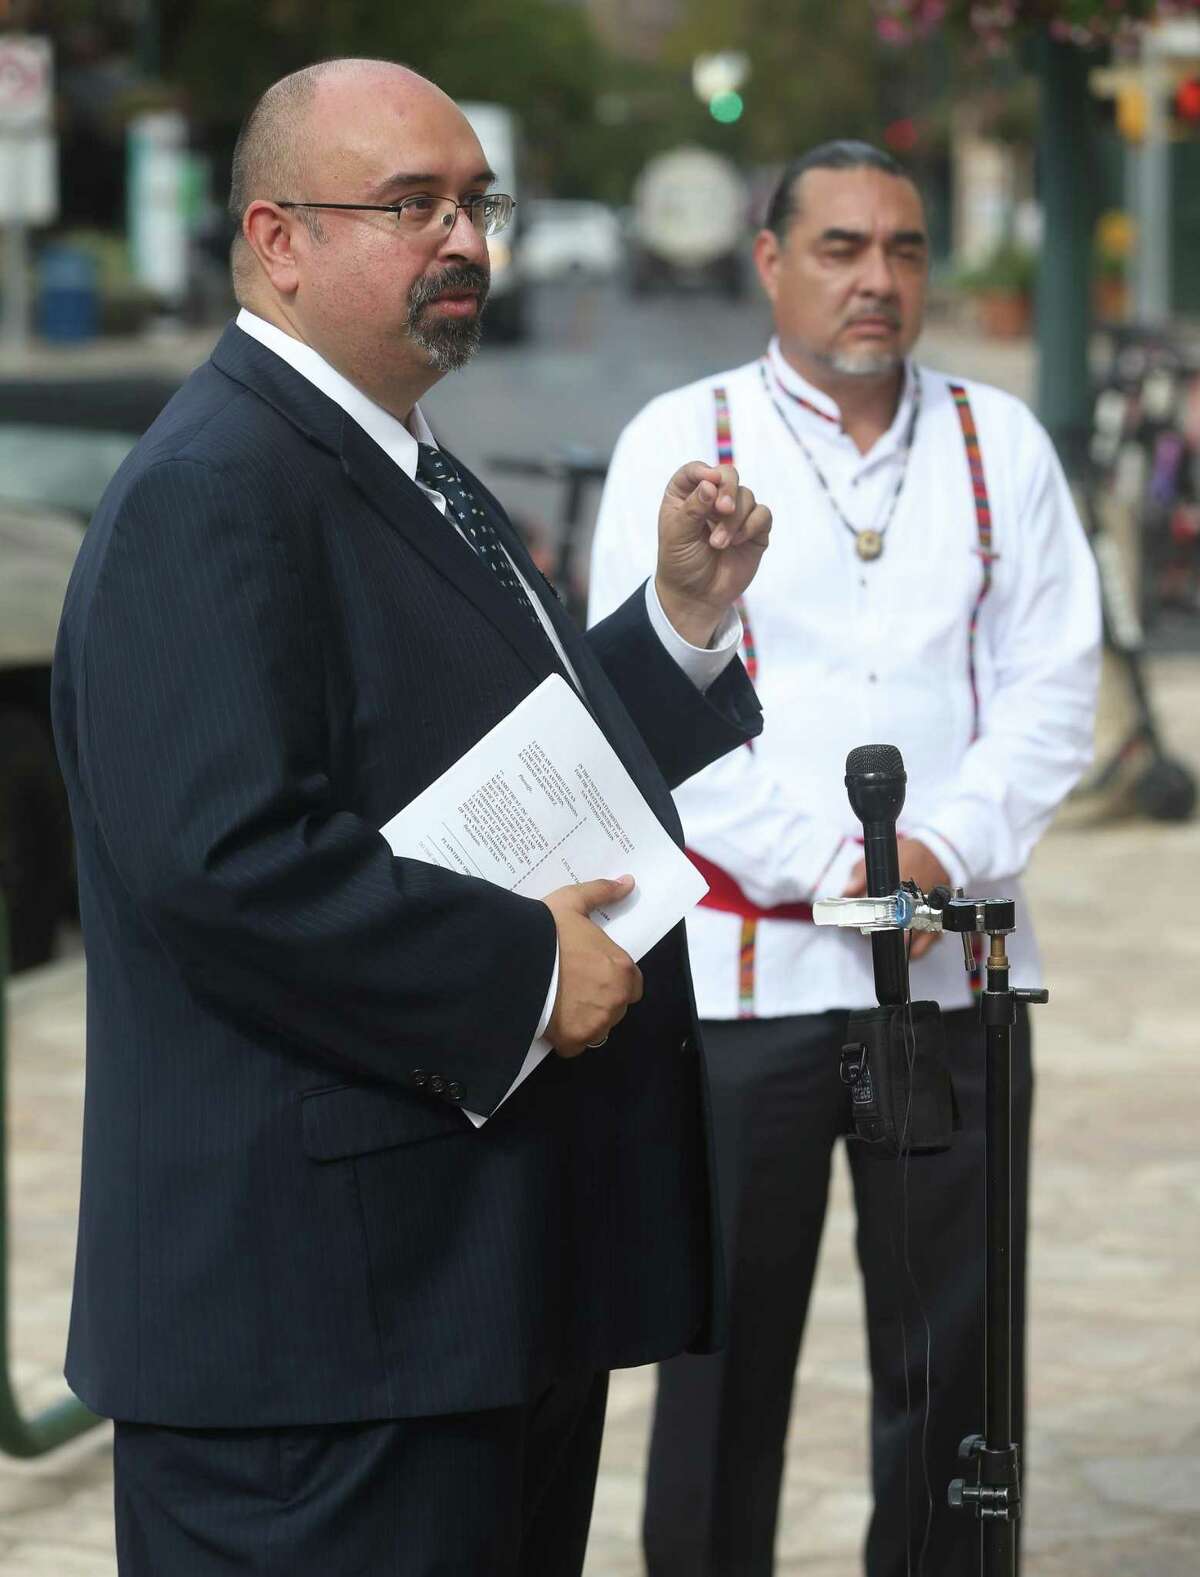 Attorney Art Martinez de Vara, left, speaks to reporters Tuesday in front of the Hipolito F. Garcia Federal Building and U.S. Courthouse across the street from the Alamo. Ramon Vasquez, executive member of the Tap Pilam Coahuiltecan Nation, stands at right. The Native American group, whose members are lineal descendants of the missions, filed a federal lawsuit Tuesday in conjunction with the San Antonio Missions Cemetery Association and Raymond Hernandez against the city of San Antonio, the Texas General Land Office and two other parties to ensure lineal descendants rights are protected and regulatory processes are followed.